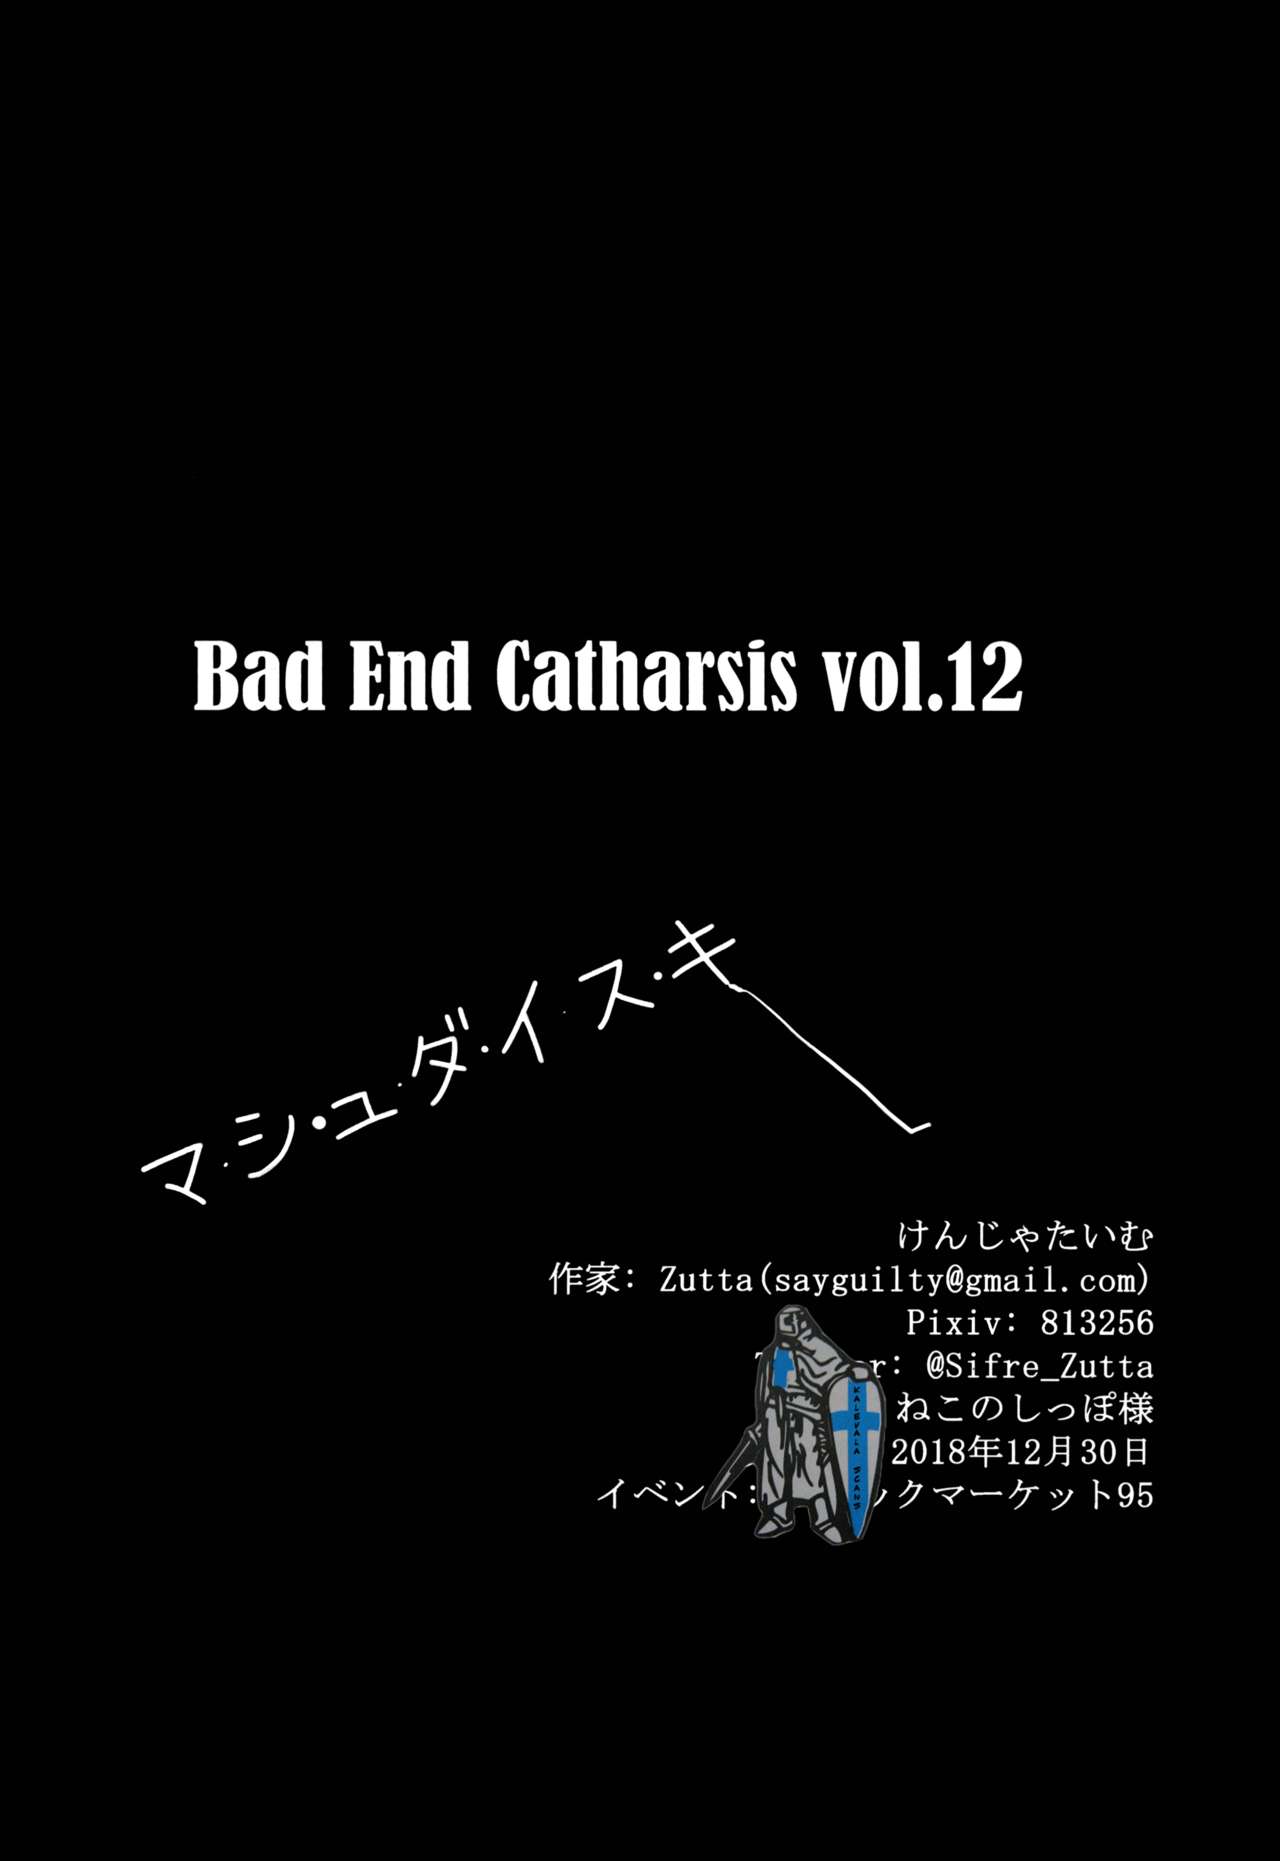 (C95) [けんじゃたいむ (Zutta)] Bad End Catharsis Vol.12 (Fate/Grand Order)